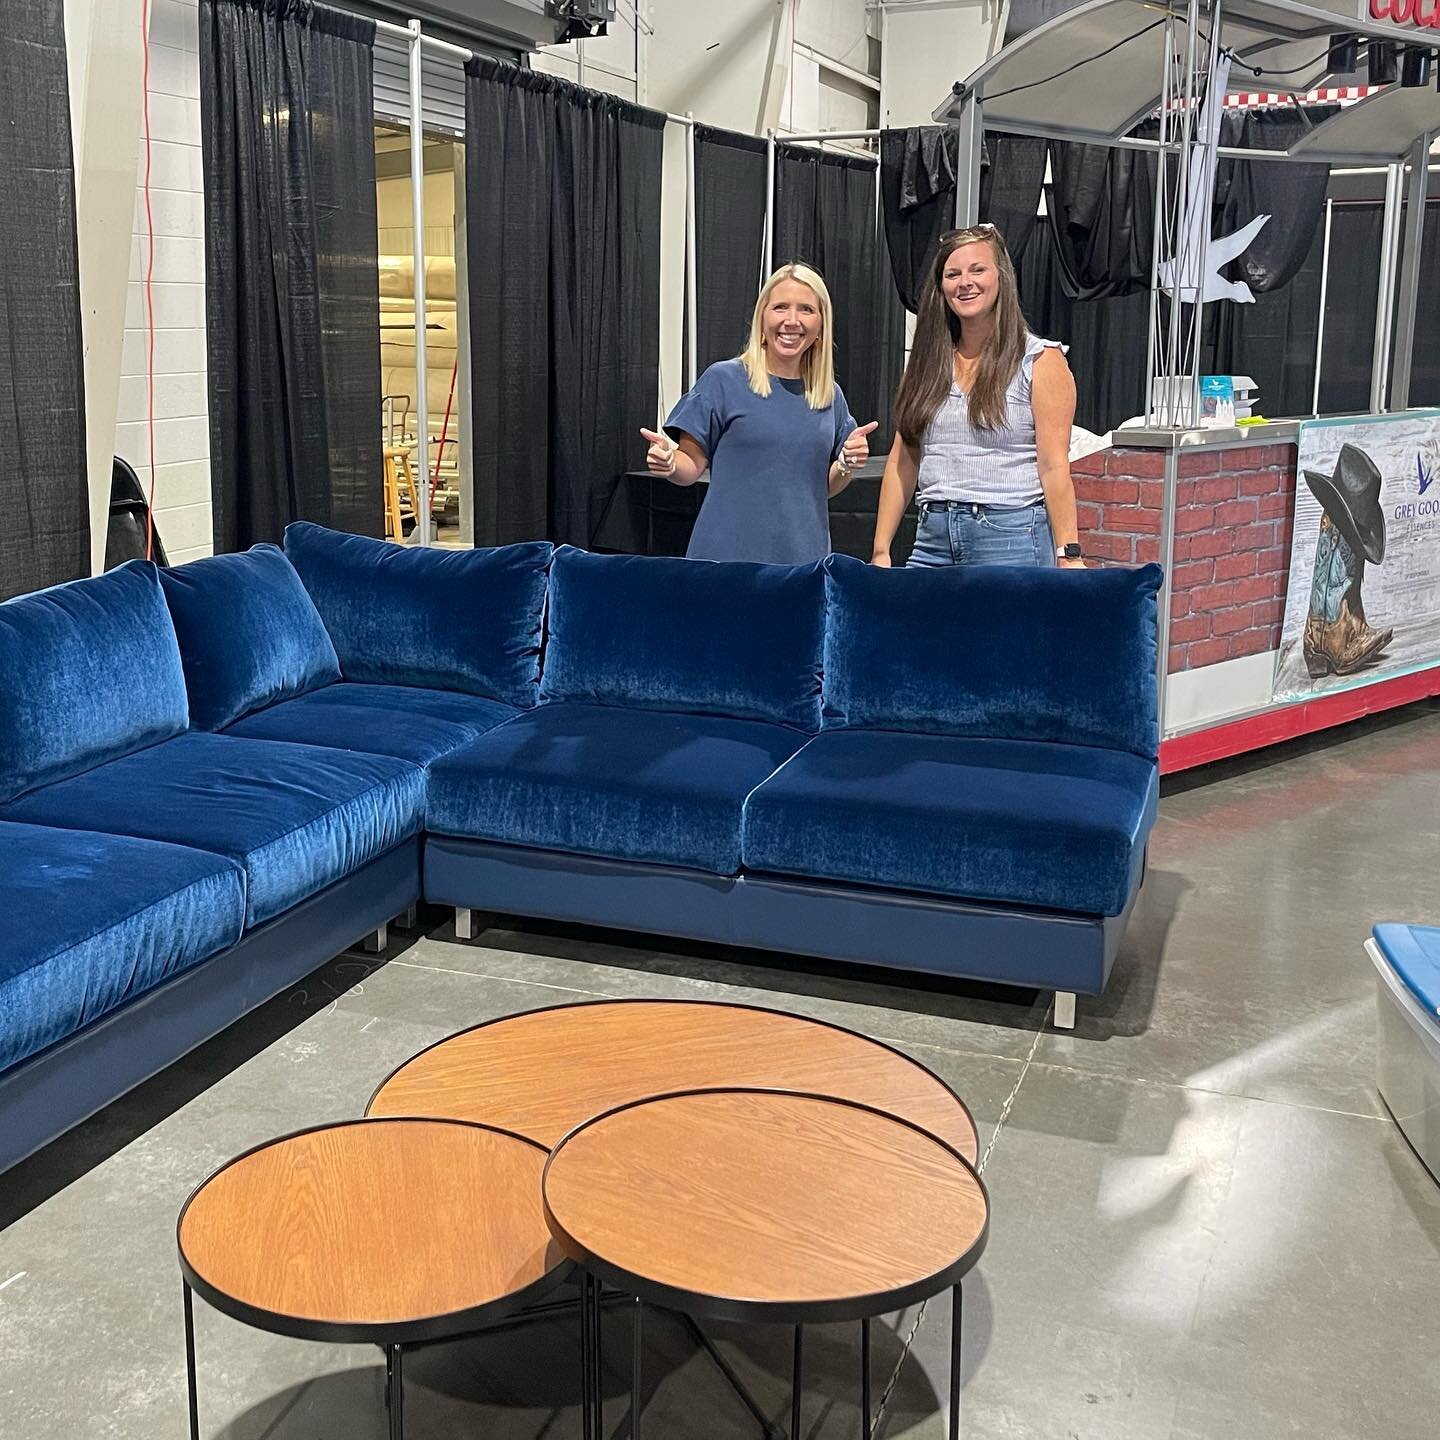 Less than 2 days away from the 2022 Cattle Baron&rsquo;s Ball of Southwest Missouri which raises money for the @americancancersociety! We are proud to be a sponsor for this year&rsquo;s event and to be providing furniture for special seating areas th